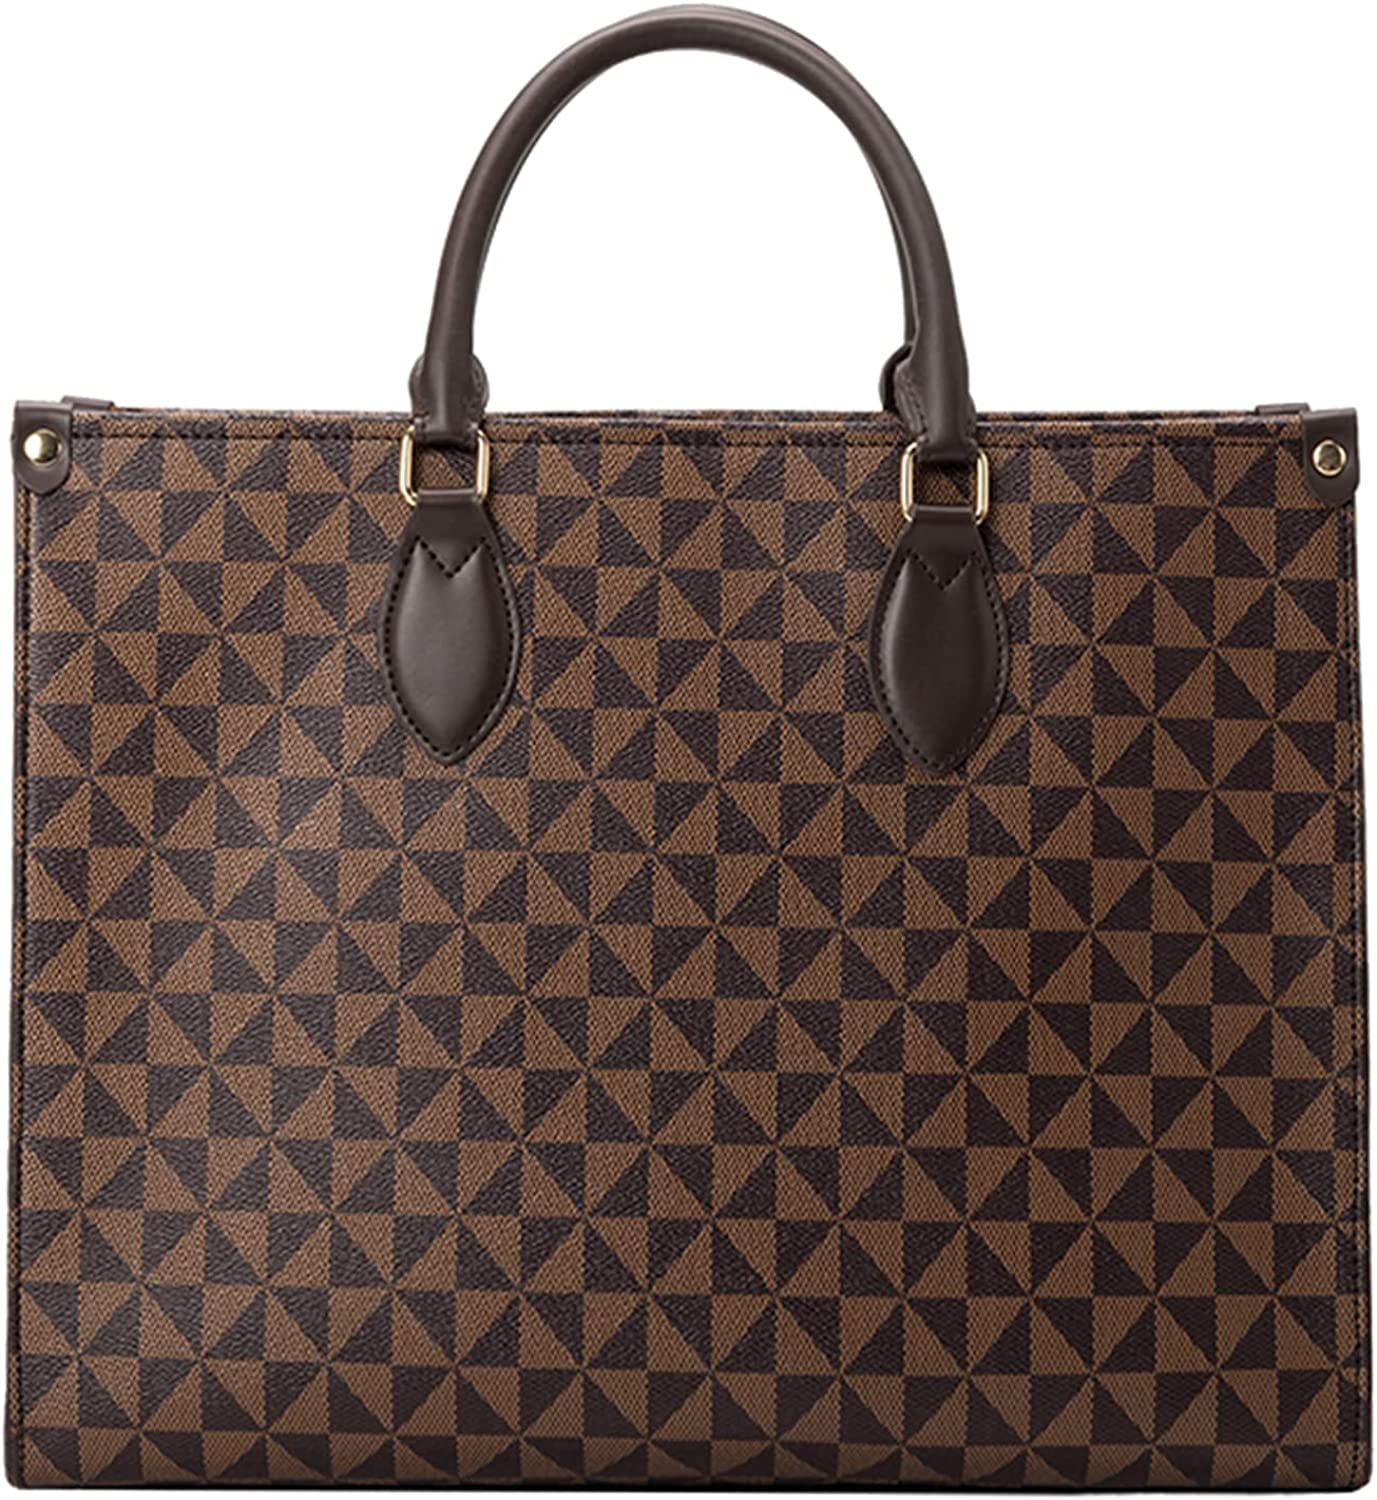 Checkered Handbag Designer Inspired Vegan Leather Tote Bags - Business  Briefcase Fashionable Square Totes 